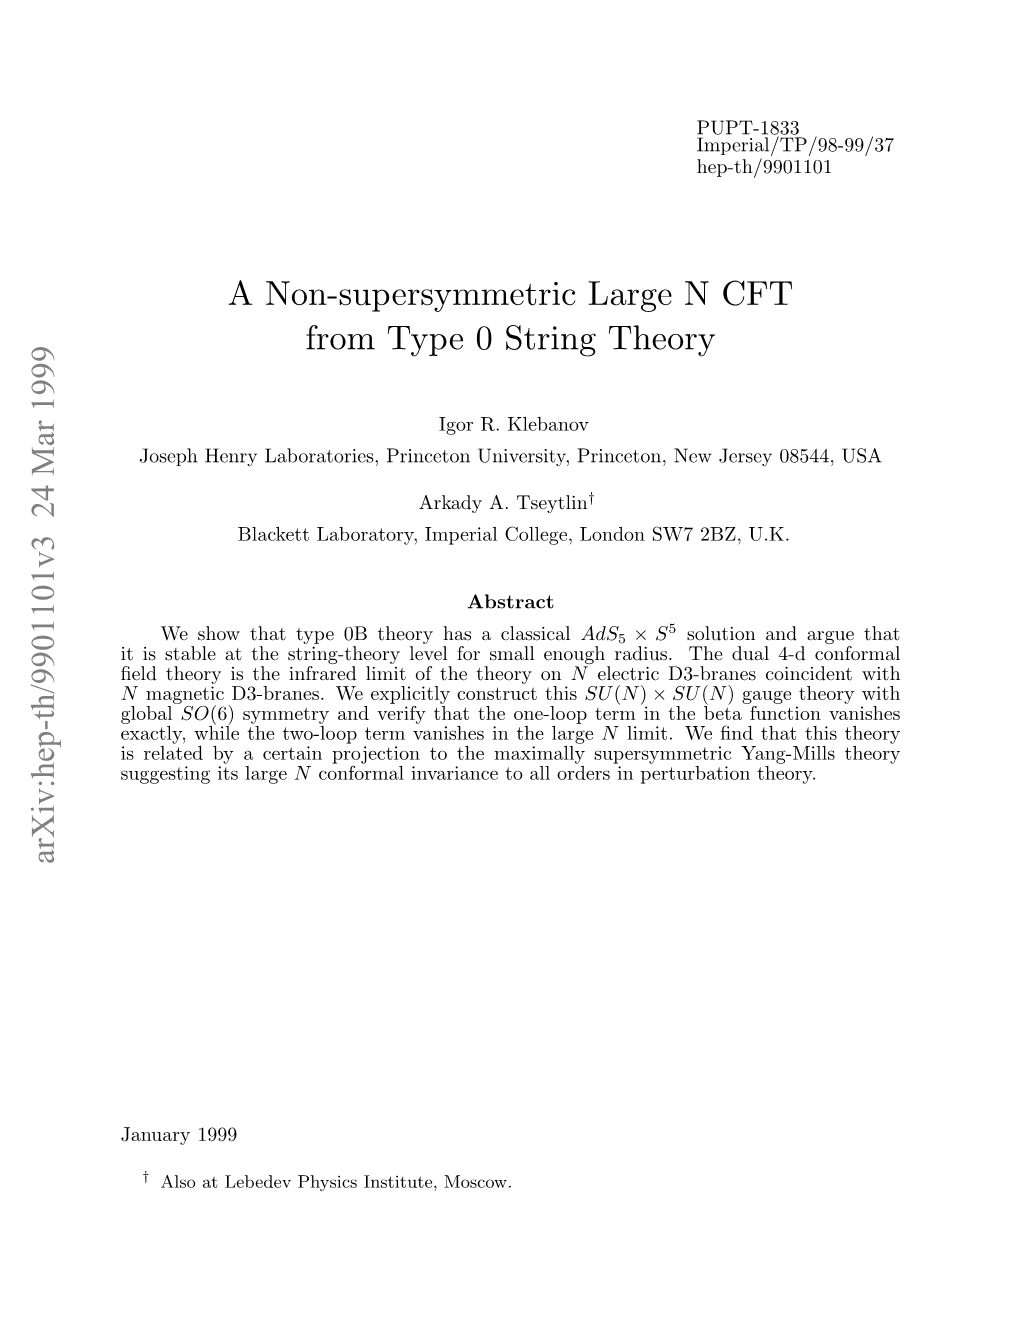 A Non-Supersymmetric Large N CFT from Type 0 String Theory